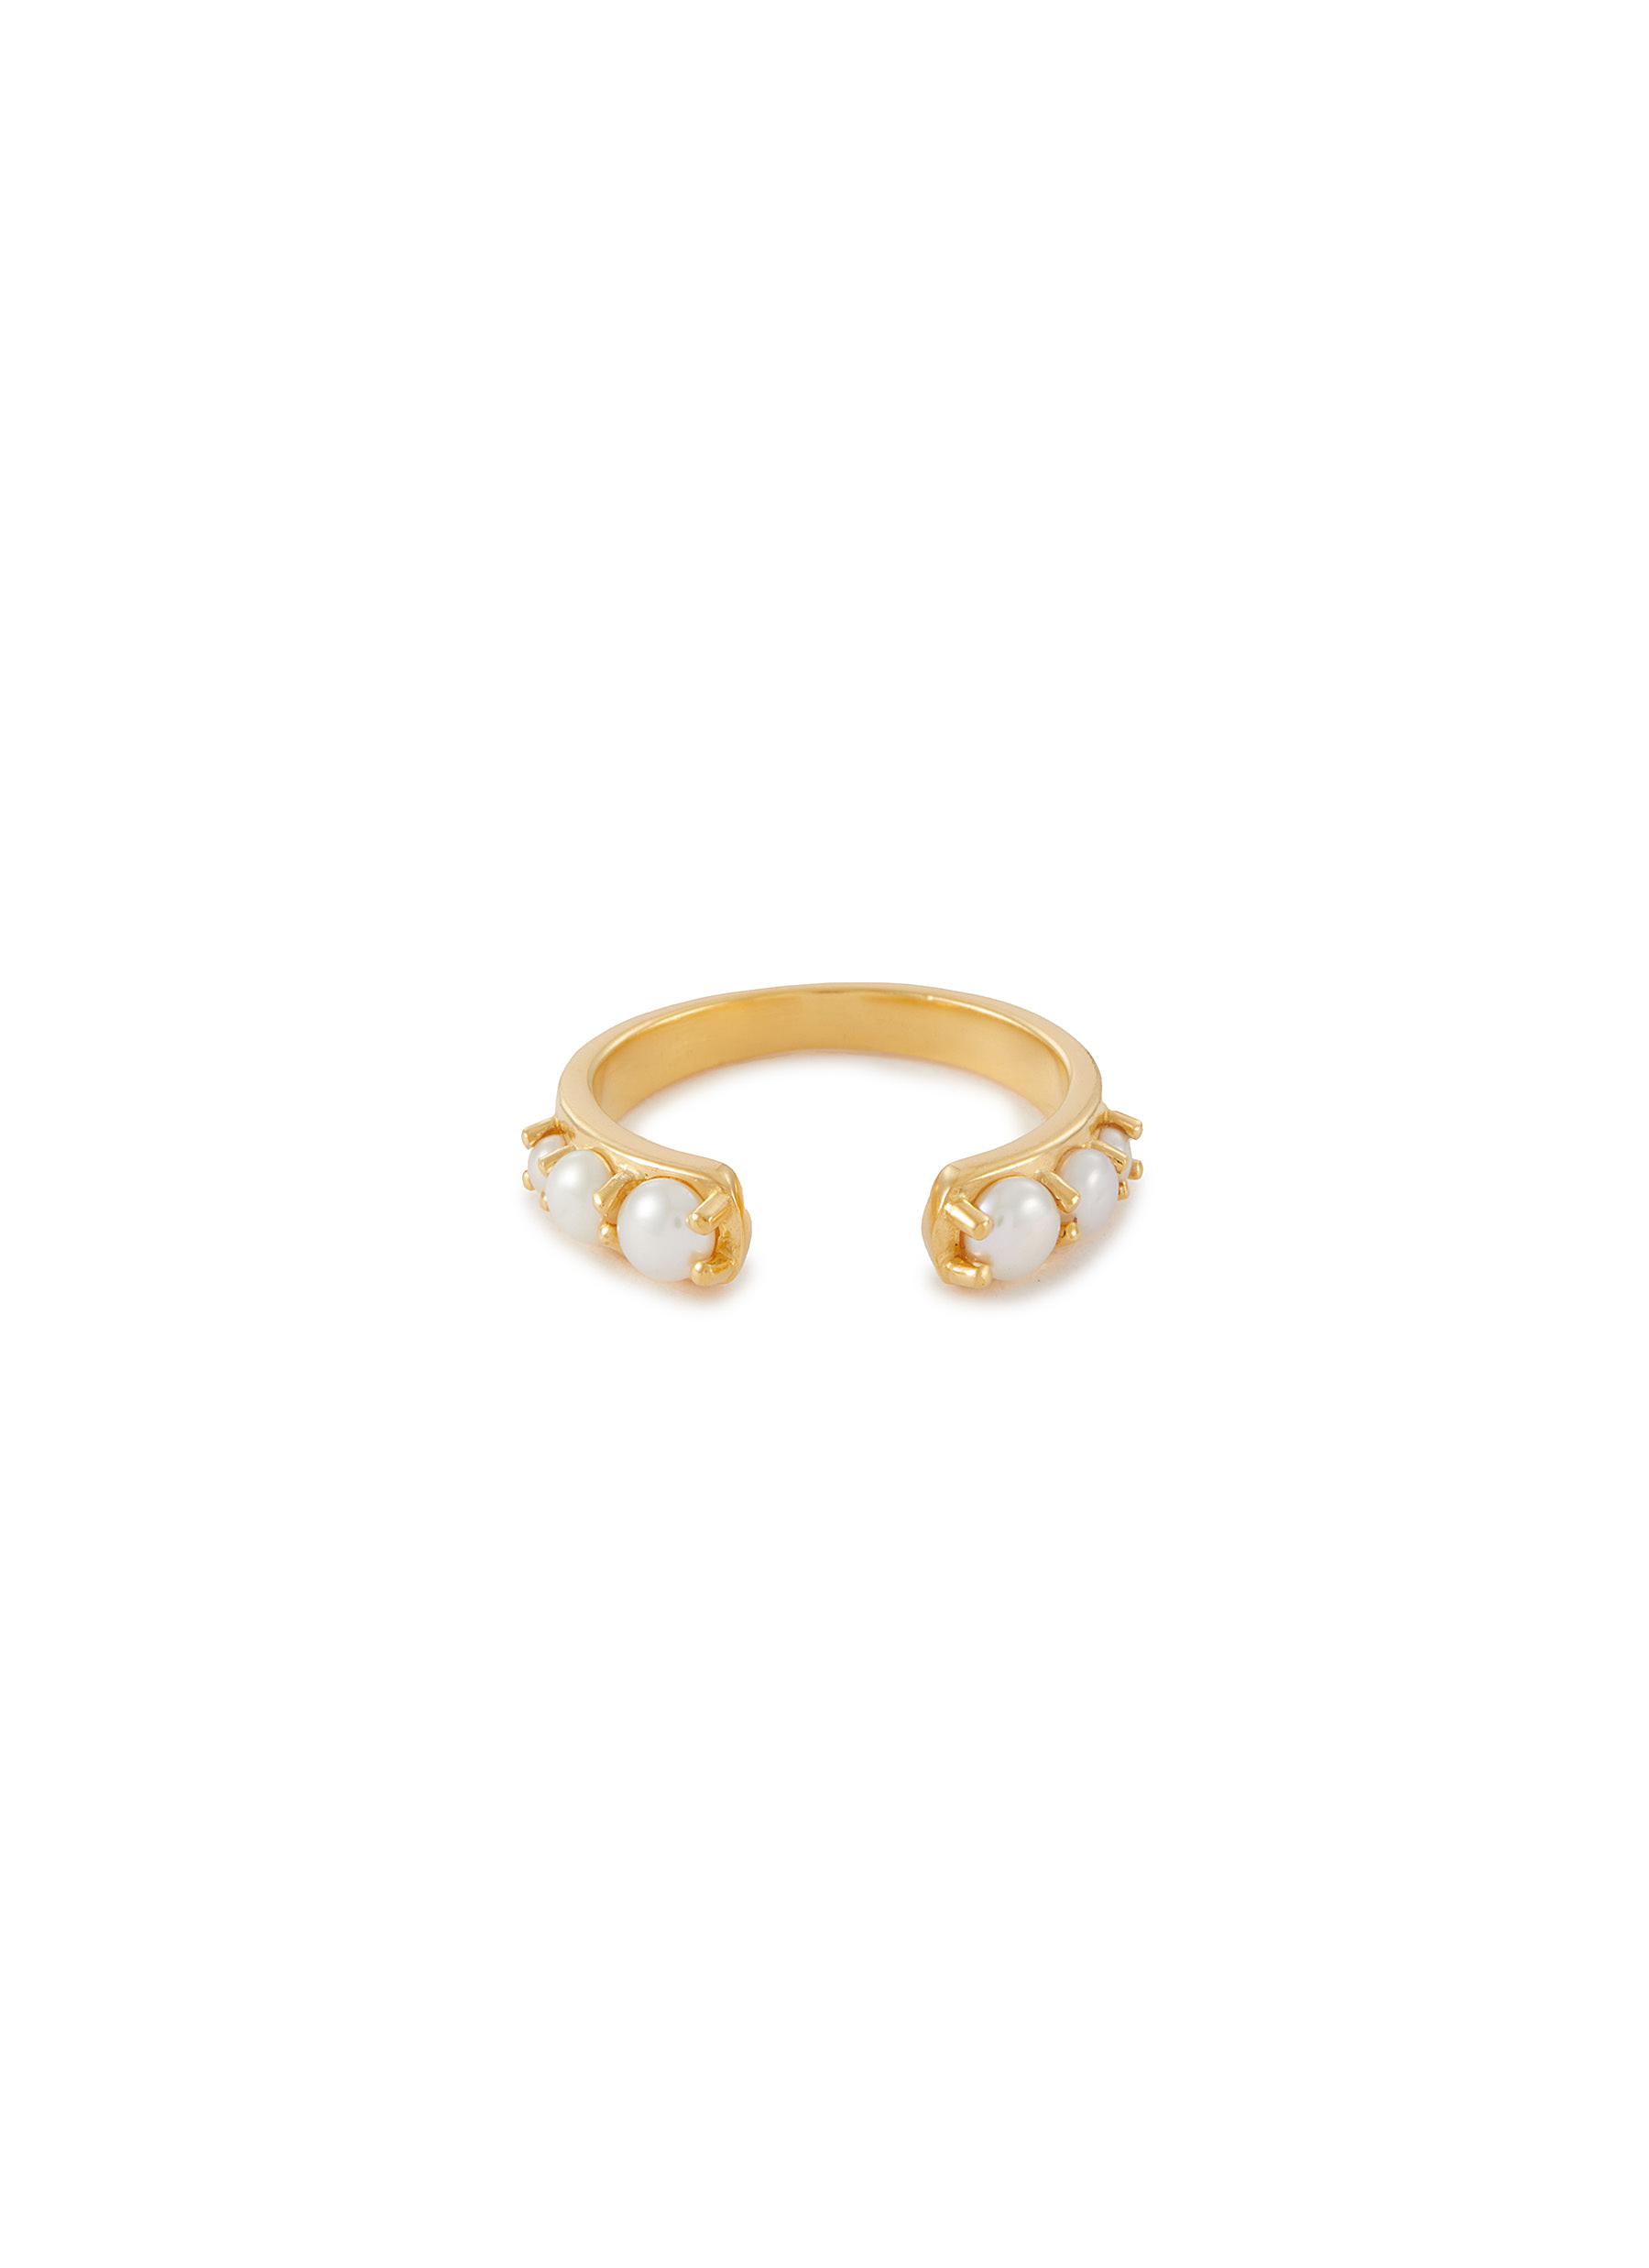 MISSOMA X HARRIS REED 18K GOLD PLATED STERLING SILVER FAUX PEARL OPENNESS RING